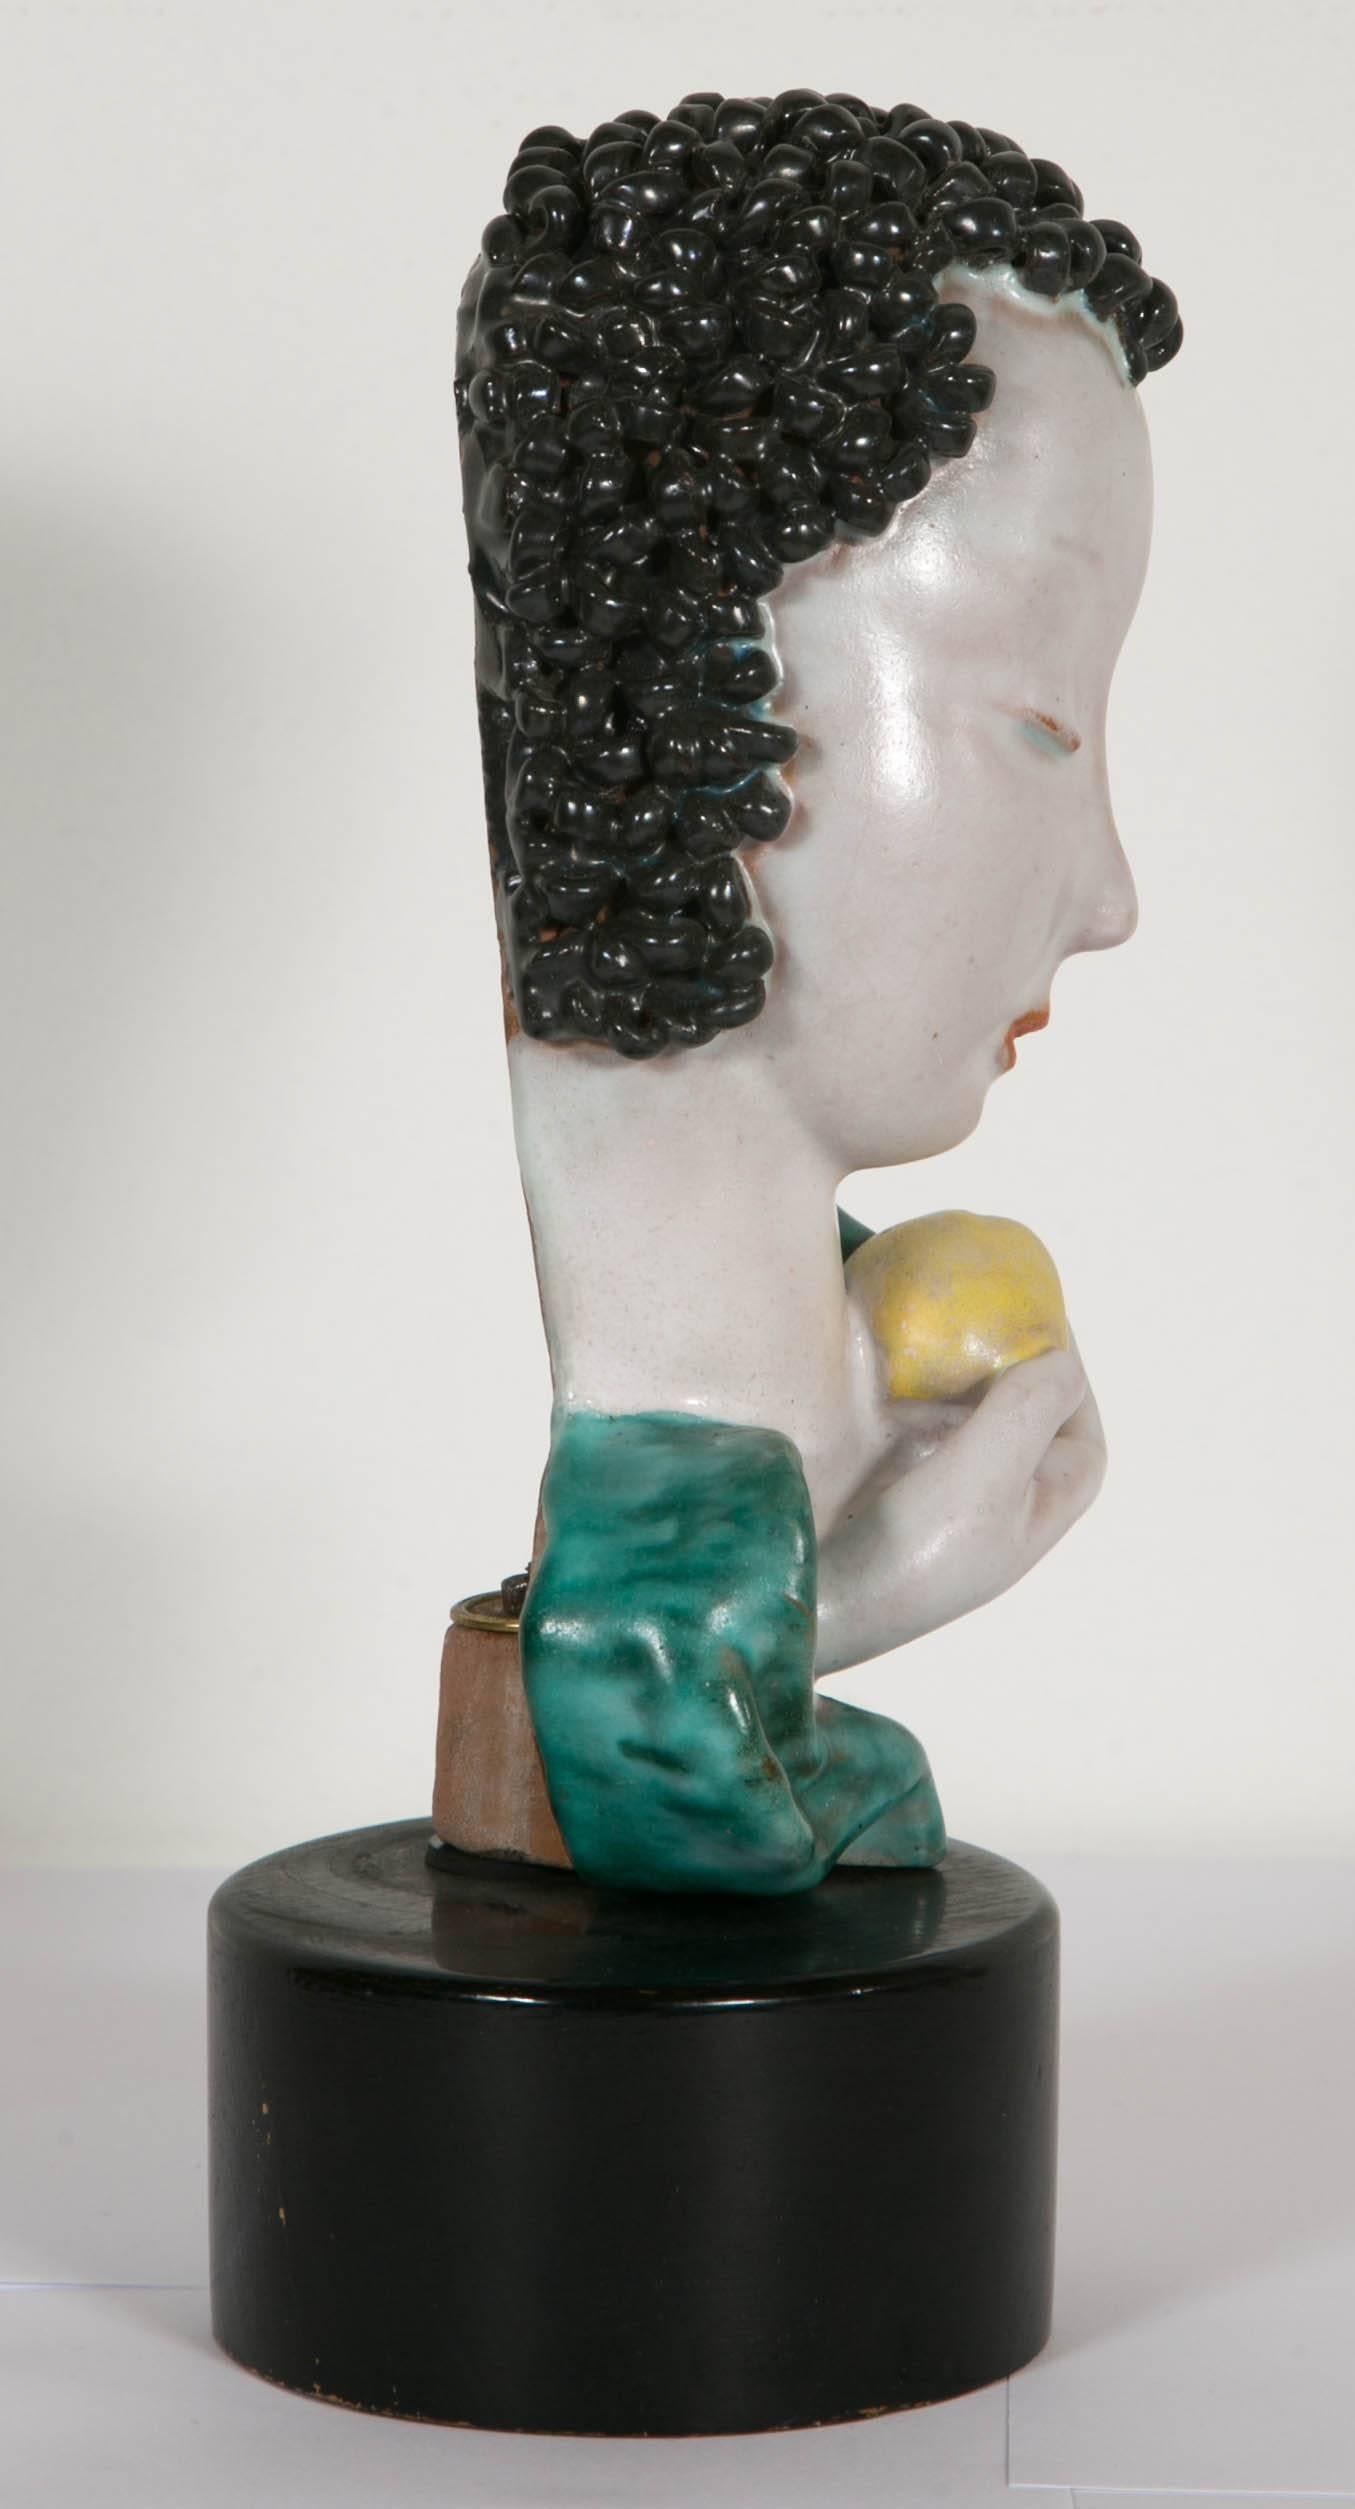 Eve with an apple made in ceramic by the famous Austrian Goldscheider workshop. On a wooden base. Signed inside, circa 1933.
The little bust is characteristic of the works its designer - Rudolf Knörlein (1902-1988) - realised over the span of nearly